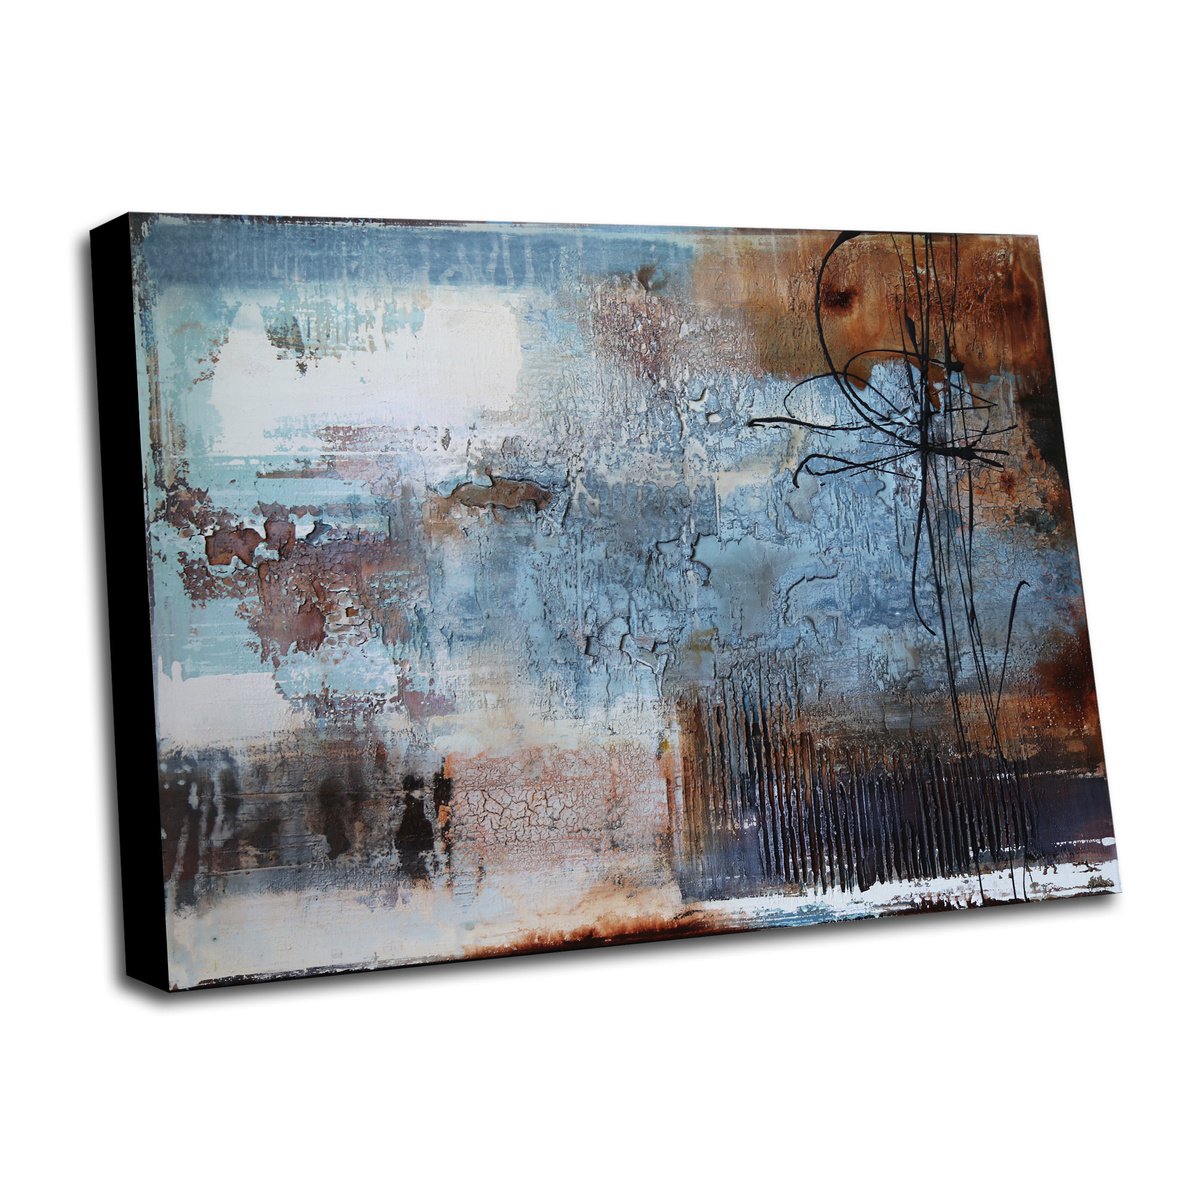 ABSTRACTION - 60 X 80 CMS - ABSTRACT PAINTING TEXTURED * BLUE * RUST * WHITE